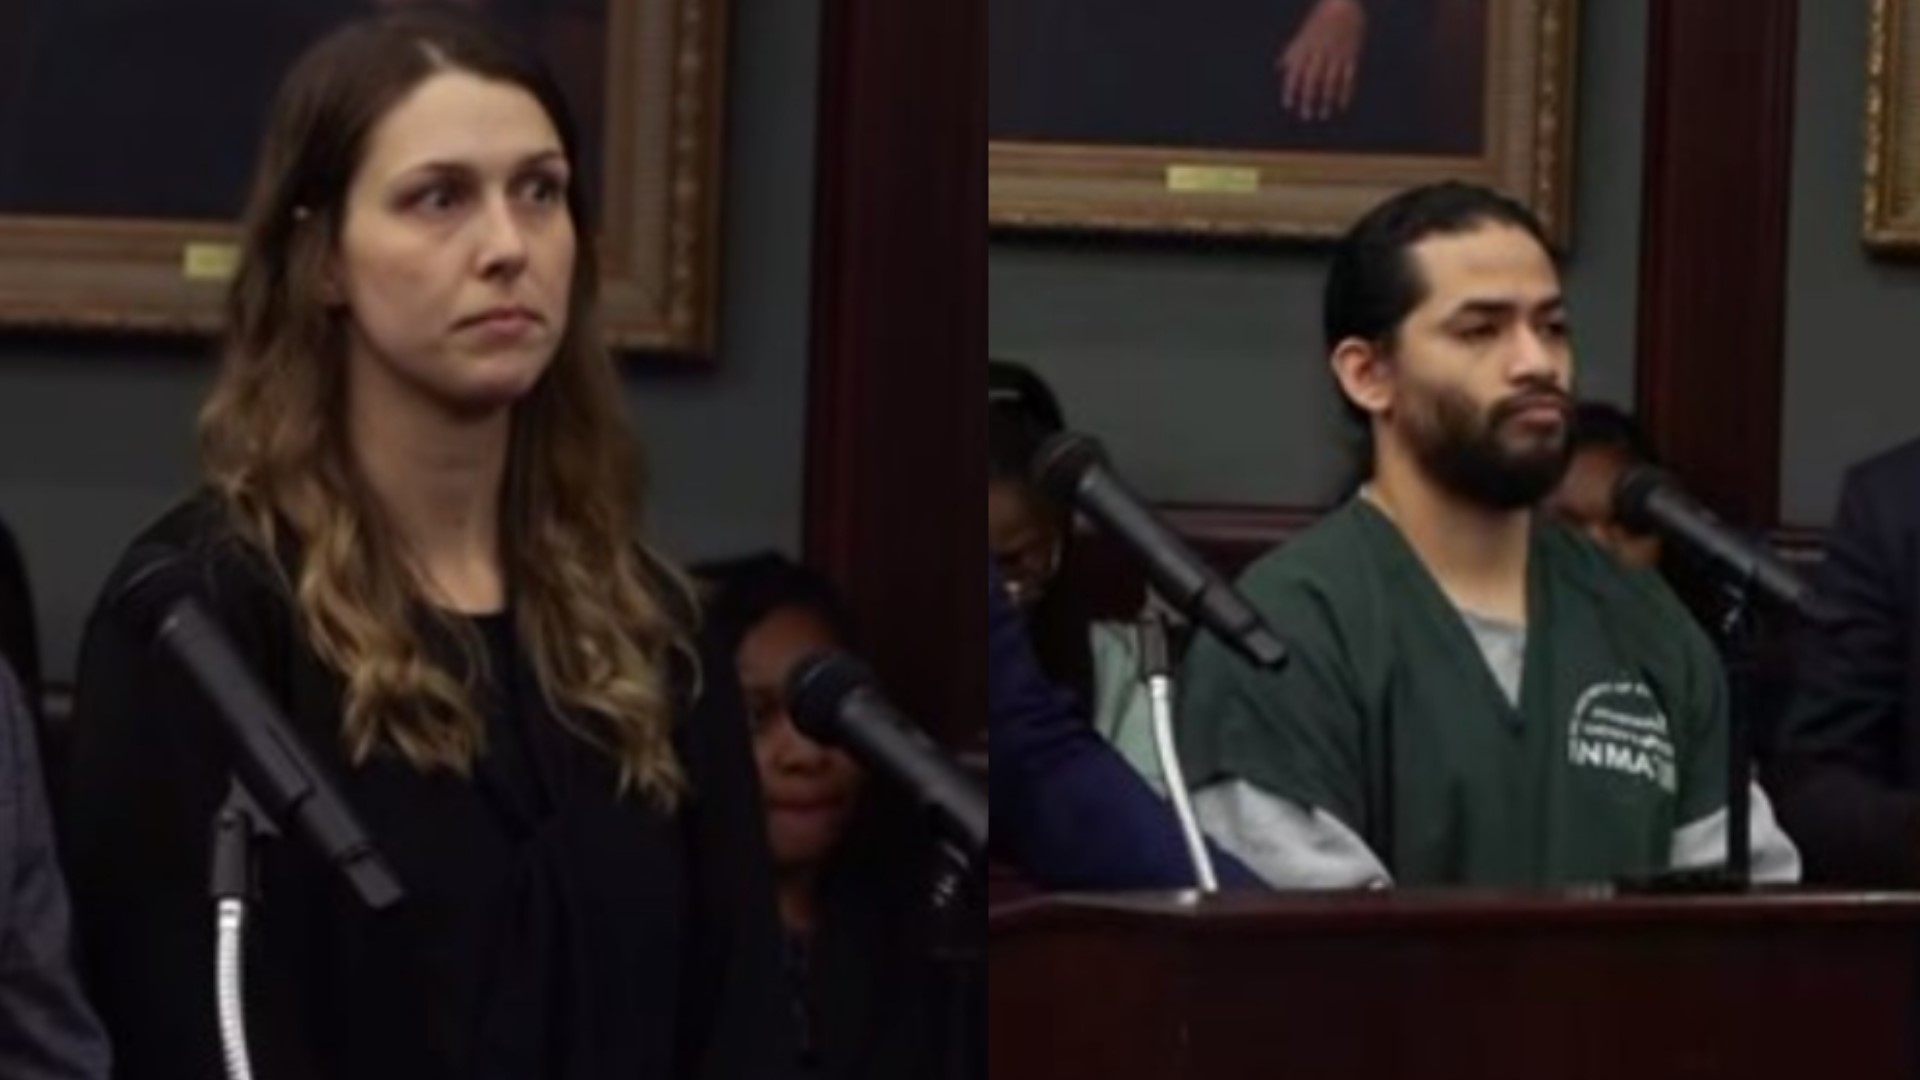 Accused Jared Bridegan killers, Shanna Gardner and Mario Fernandez-Saldana, appeared in Duval Co. court back-to-back on Friday, Dec. 1, 2023 for pre-trial hearings.